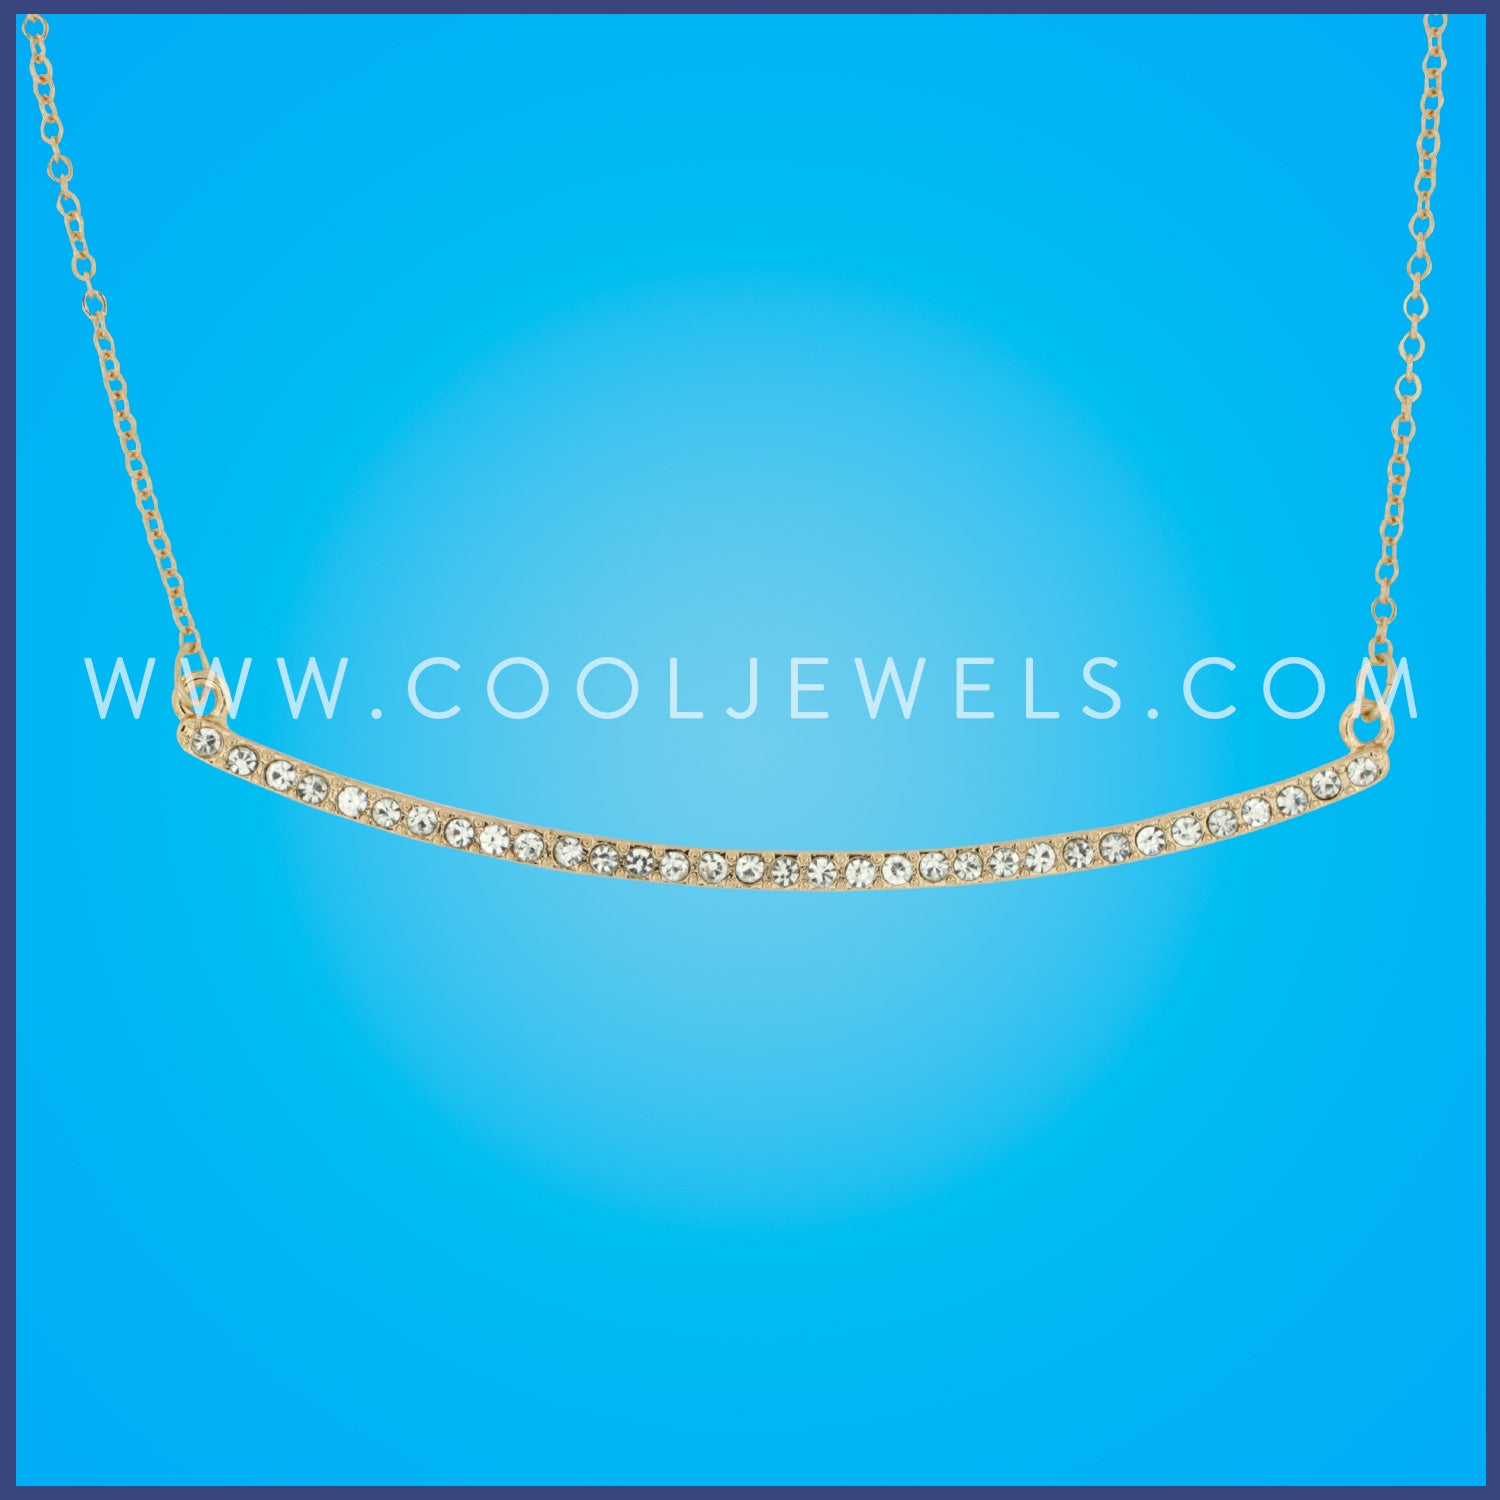 GOLD CHAIN NECKLACE WITH RHINESTONE BAR